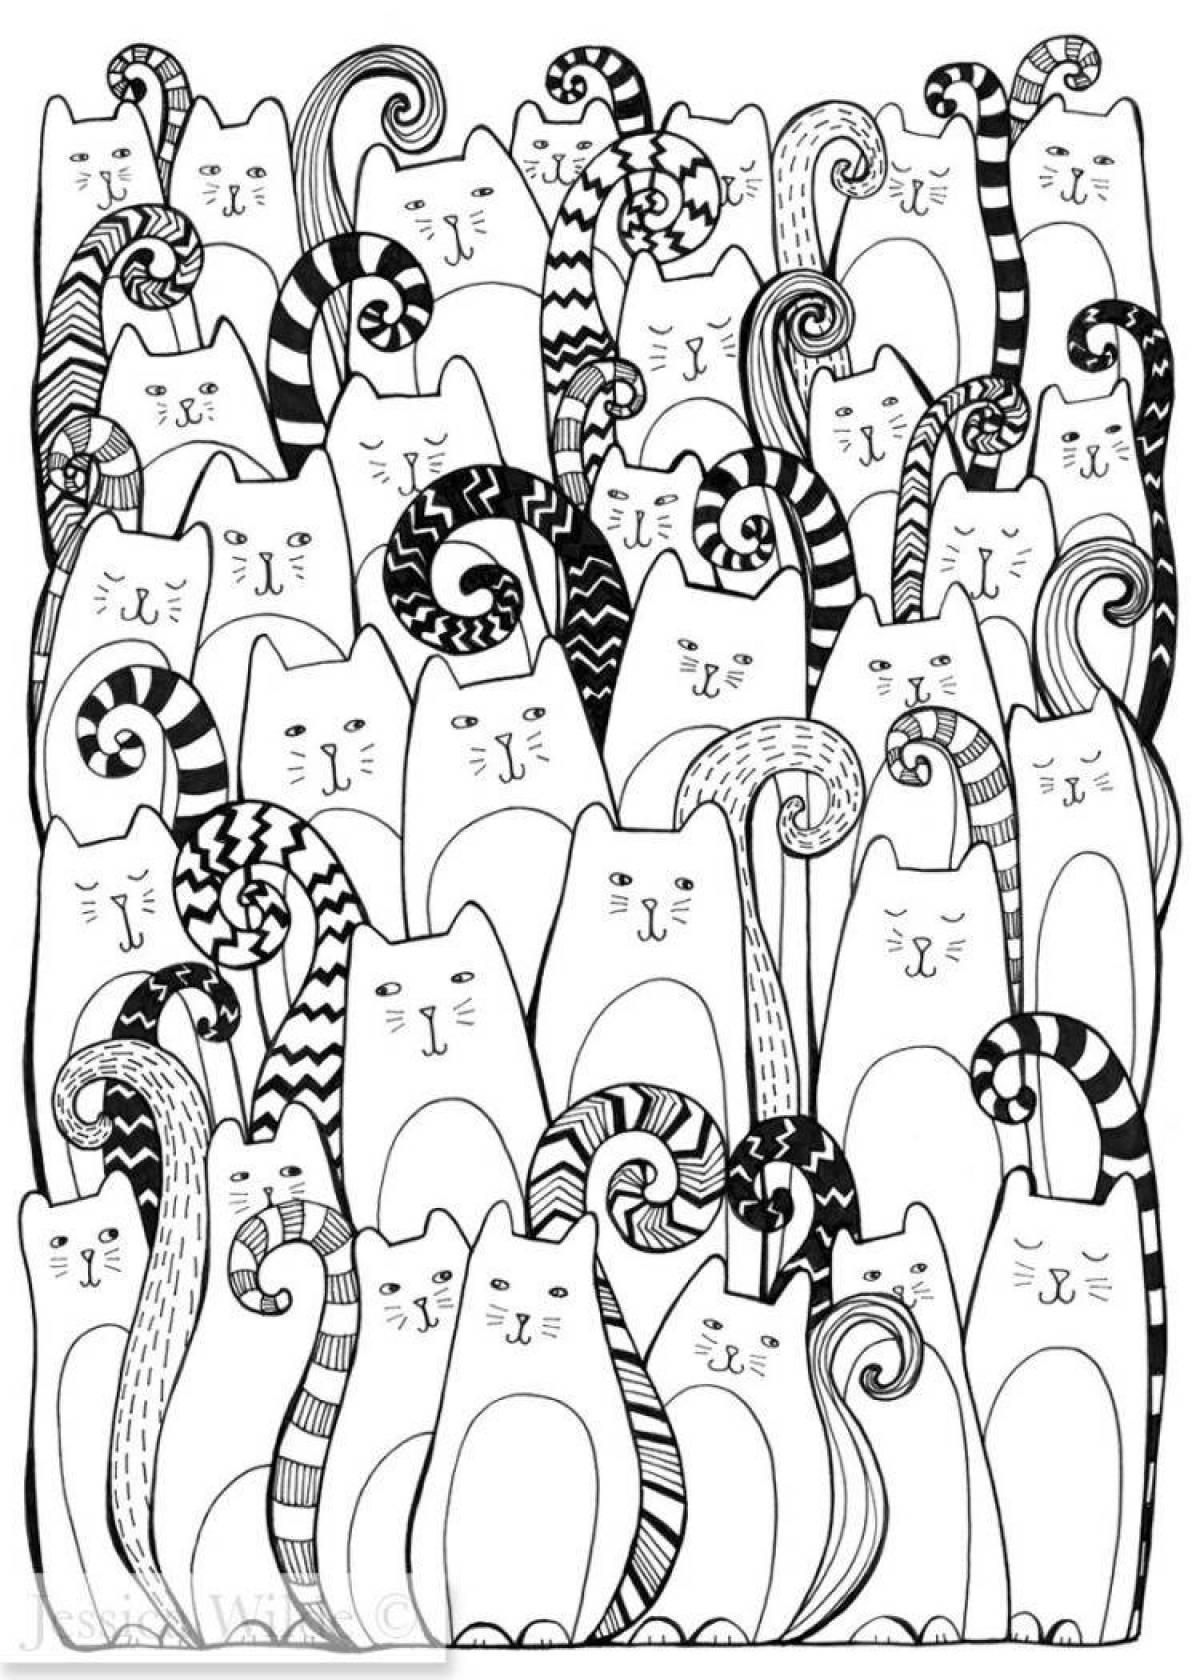 Adorable cats coloring book